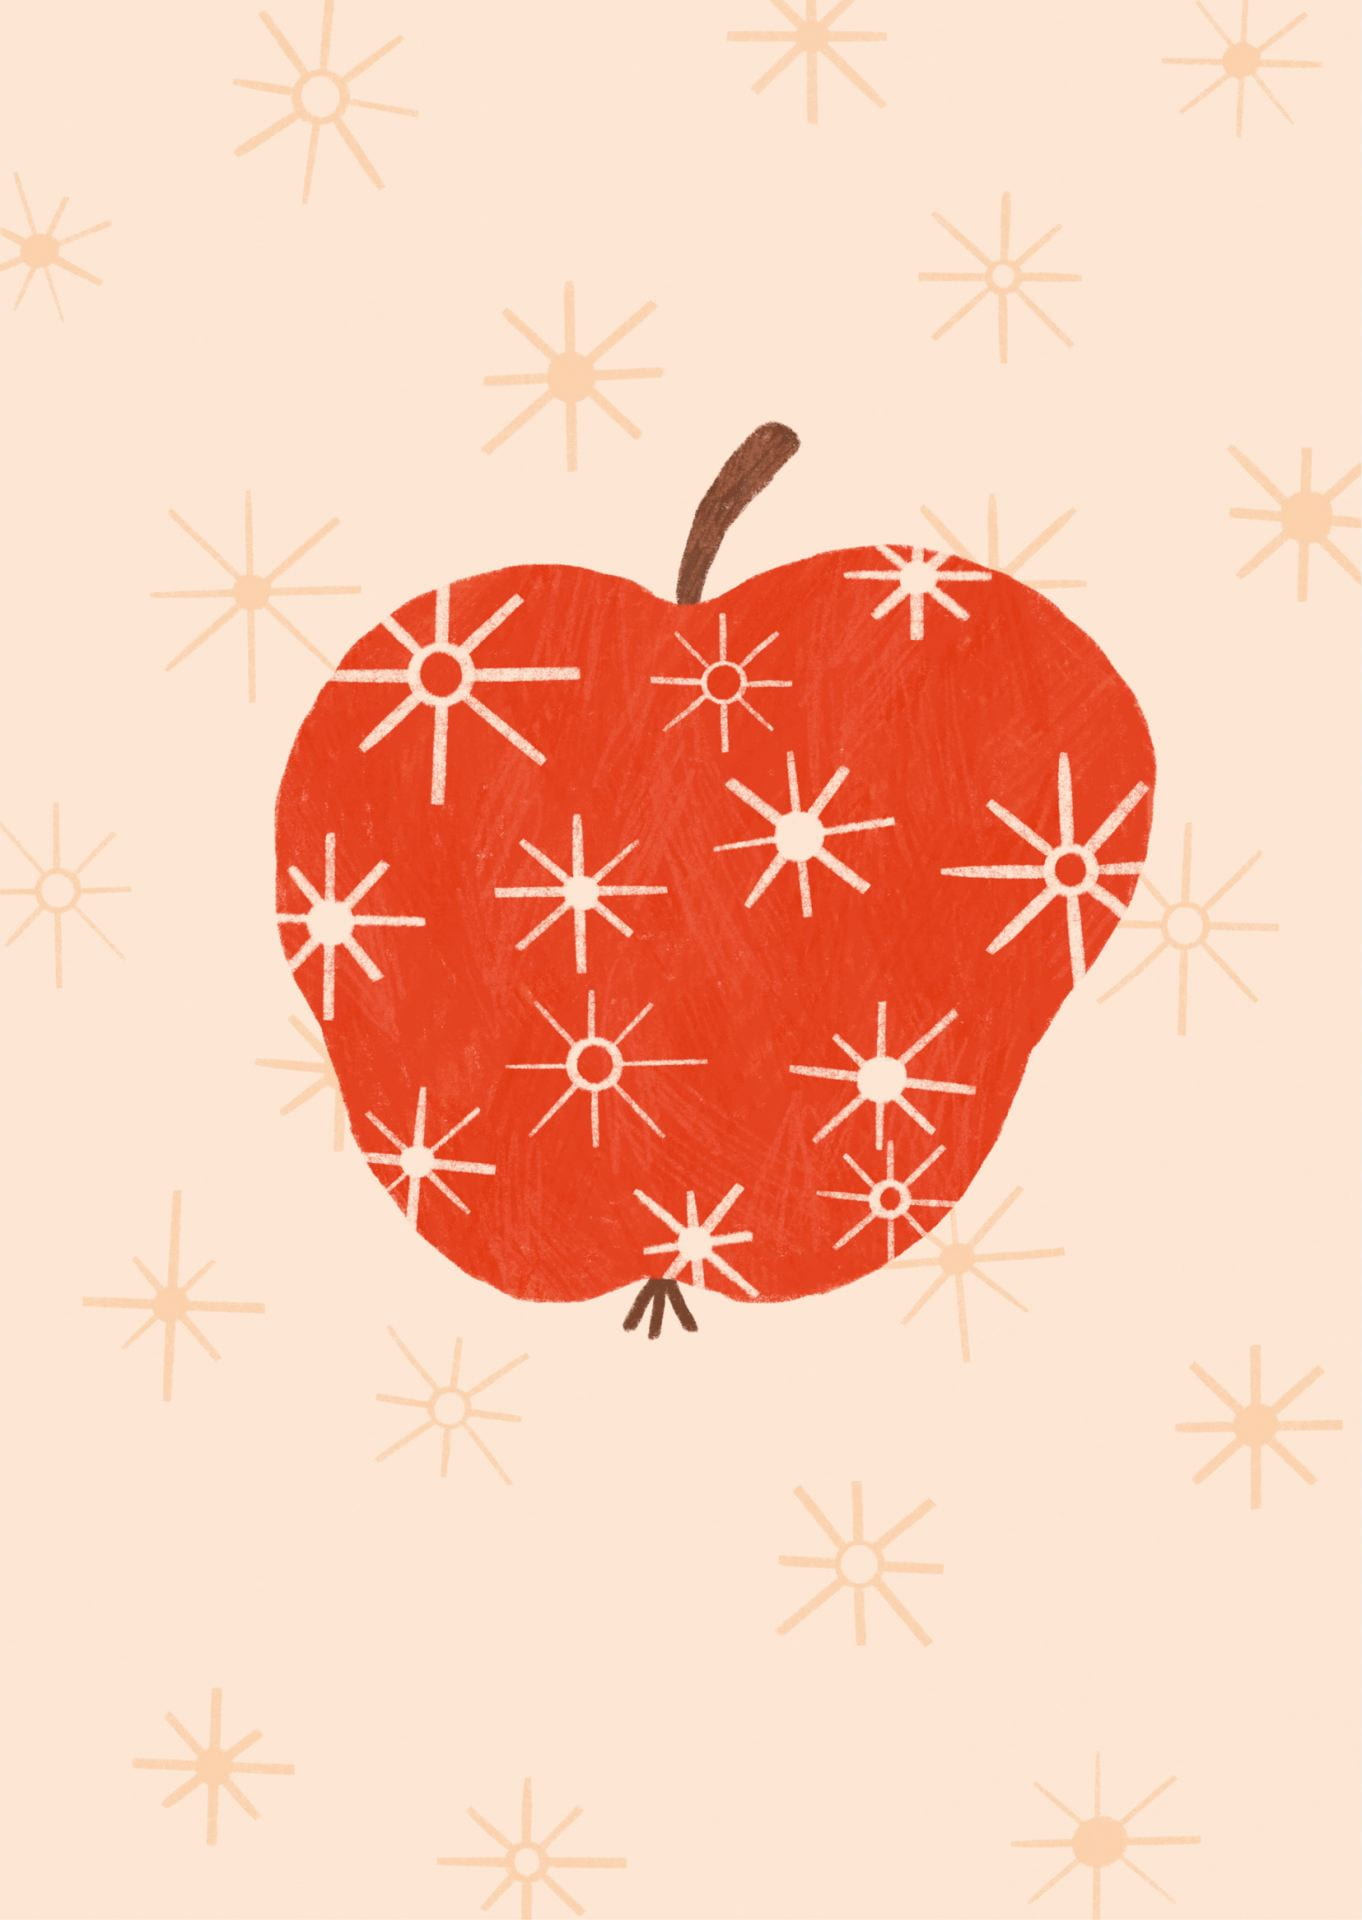 A minimalist illustration of an apple, with sparkling star designs on the foreground.